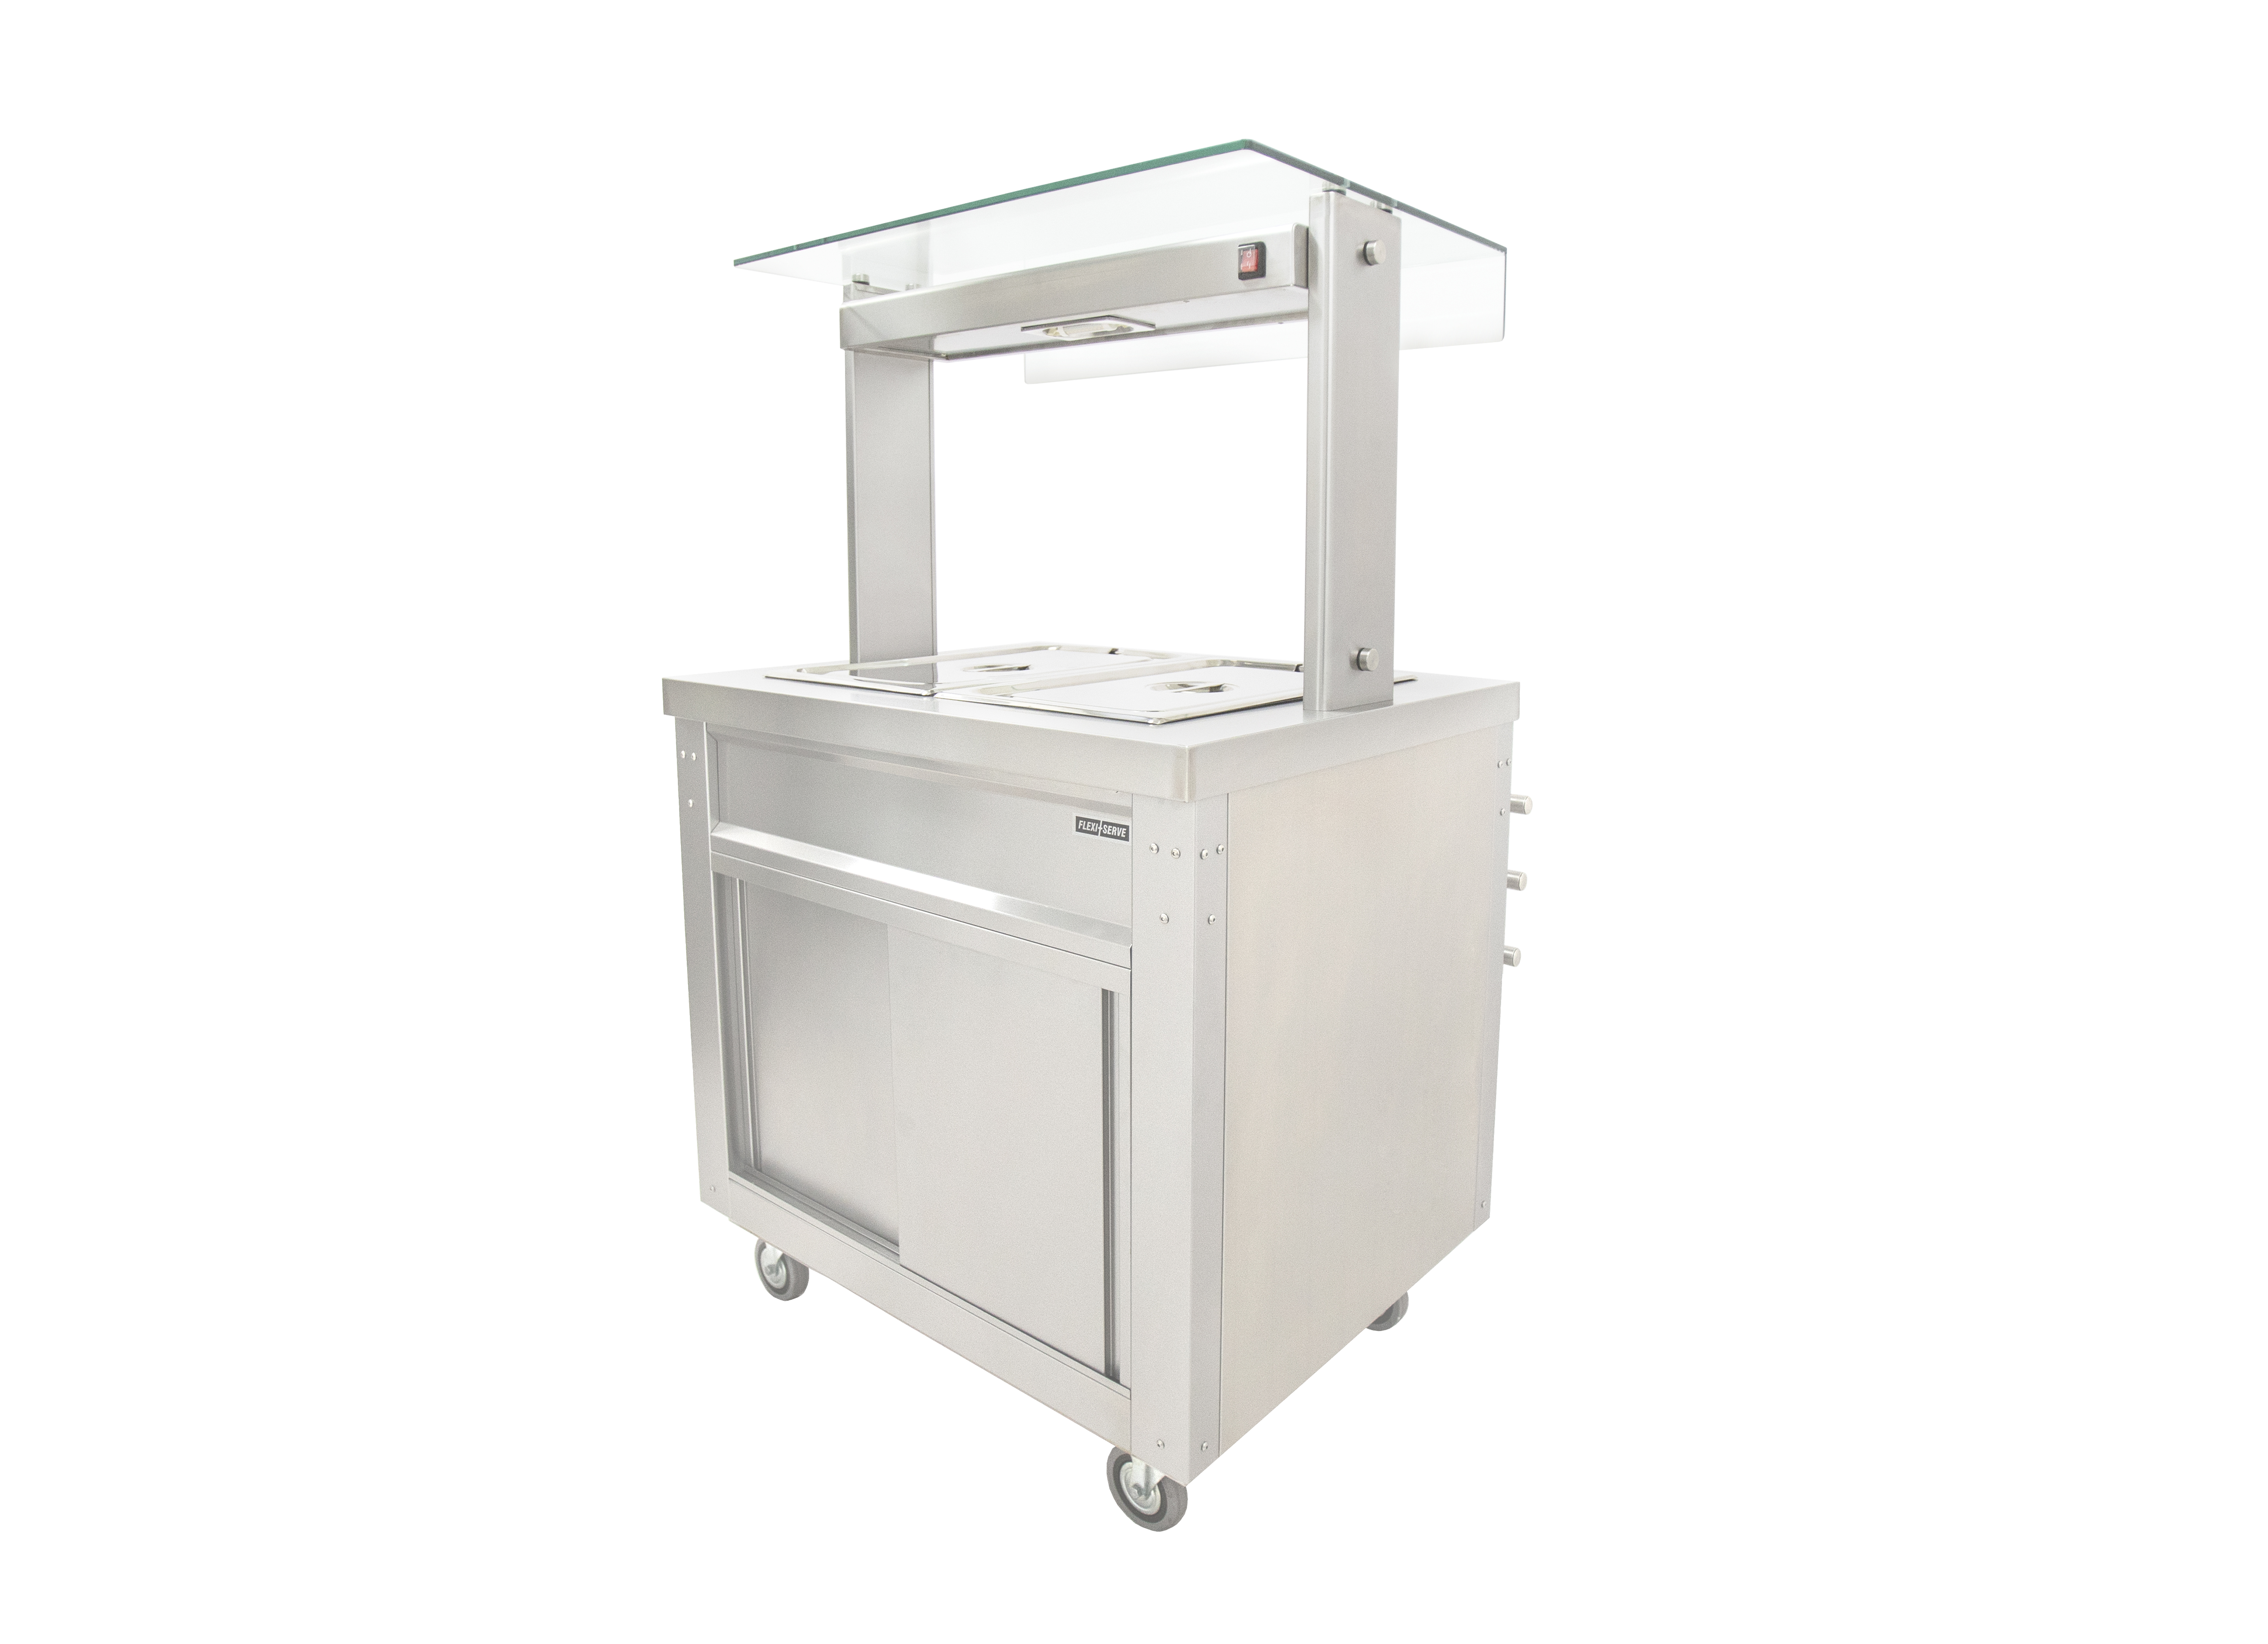 Parry FS-AW2 - Flexi Serve Ambient Cupboard with Chilled Well